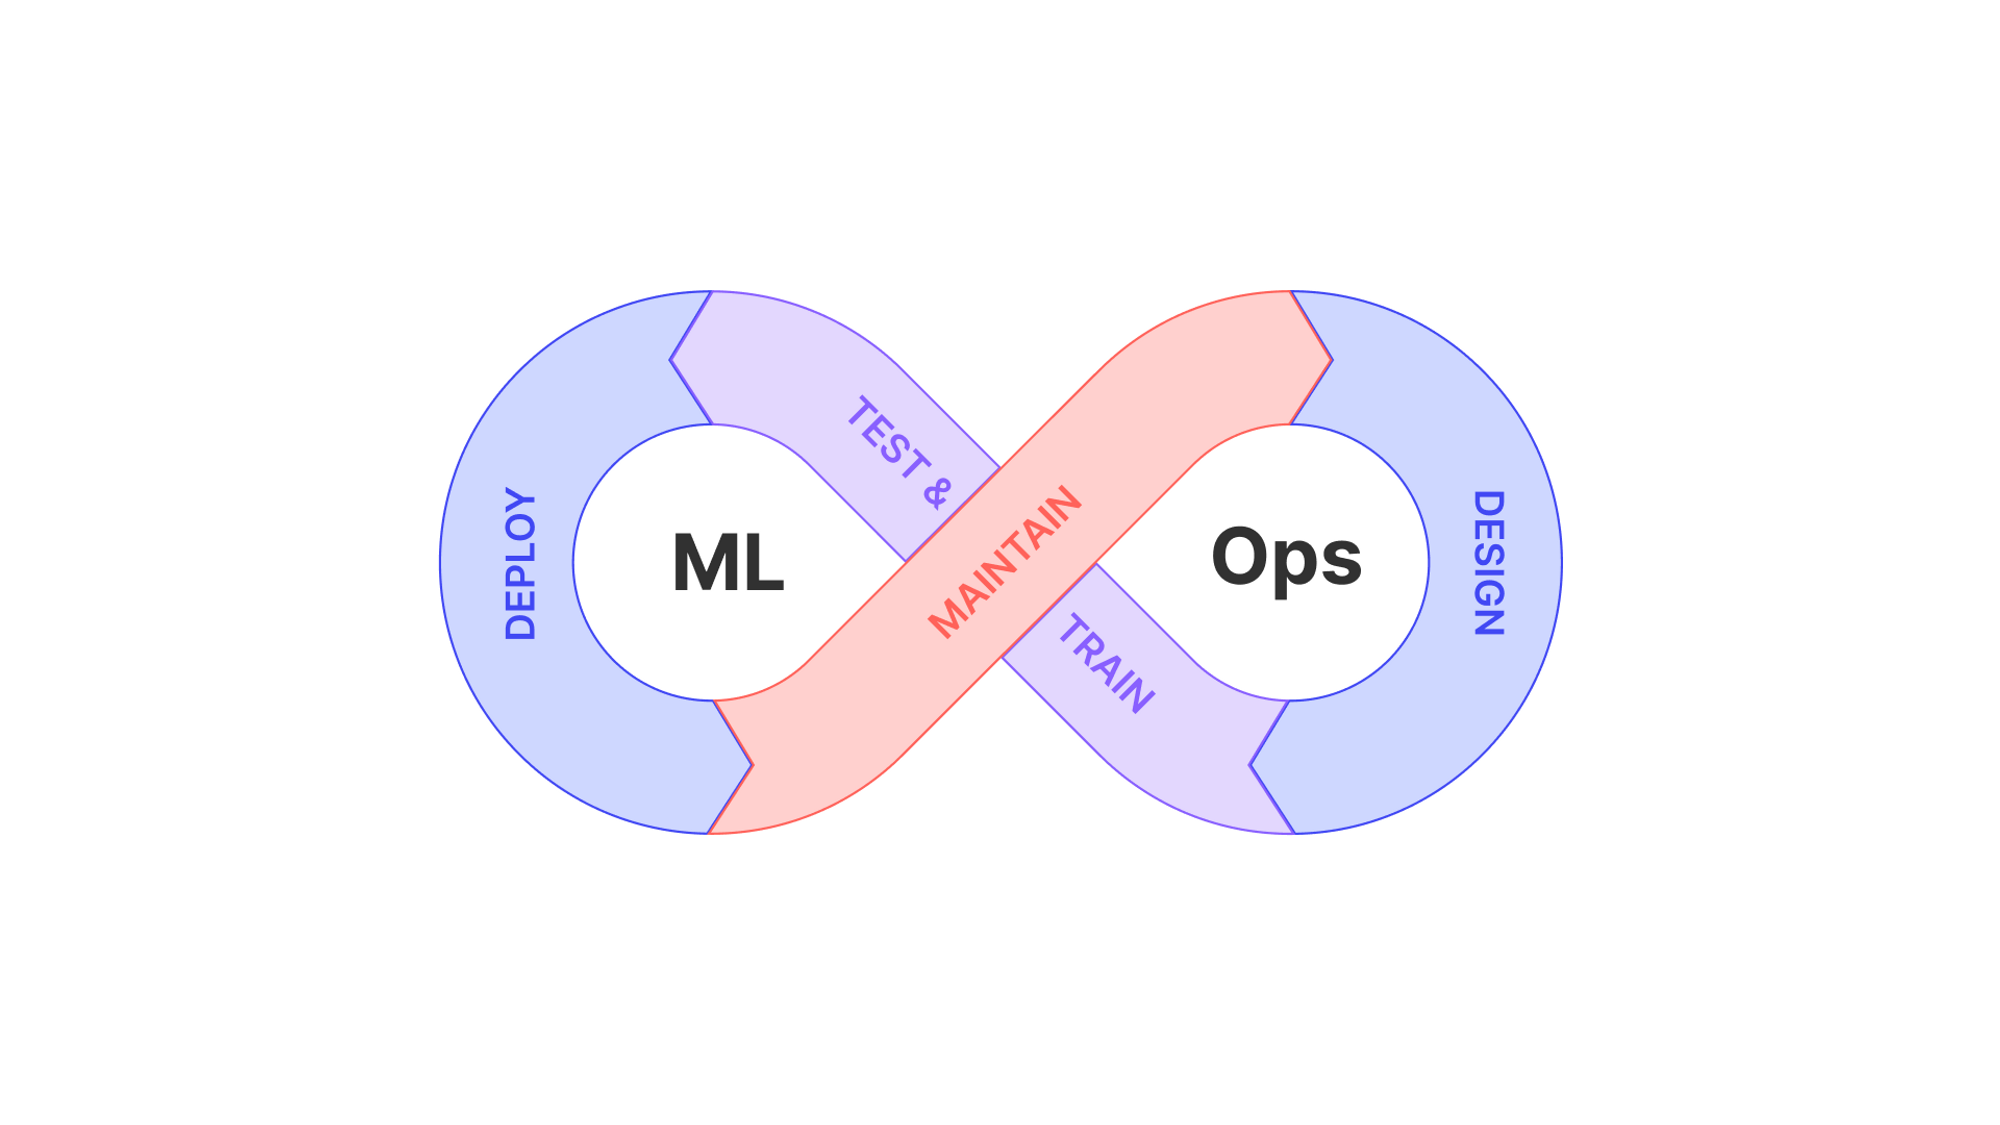 MLOPs provides ongoing optimization to computer vision datasets for improved machine learning performance.